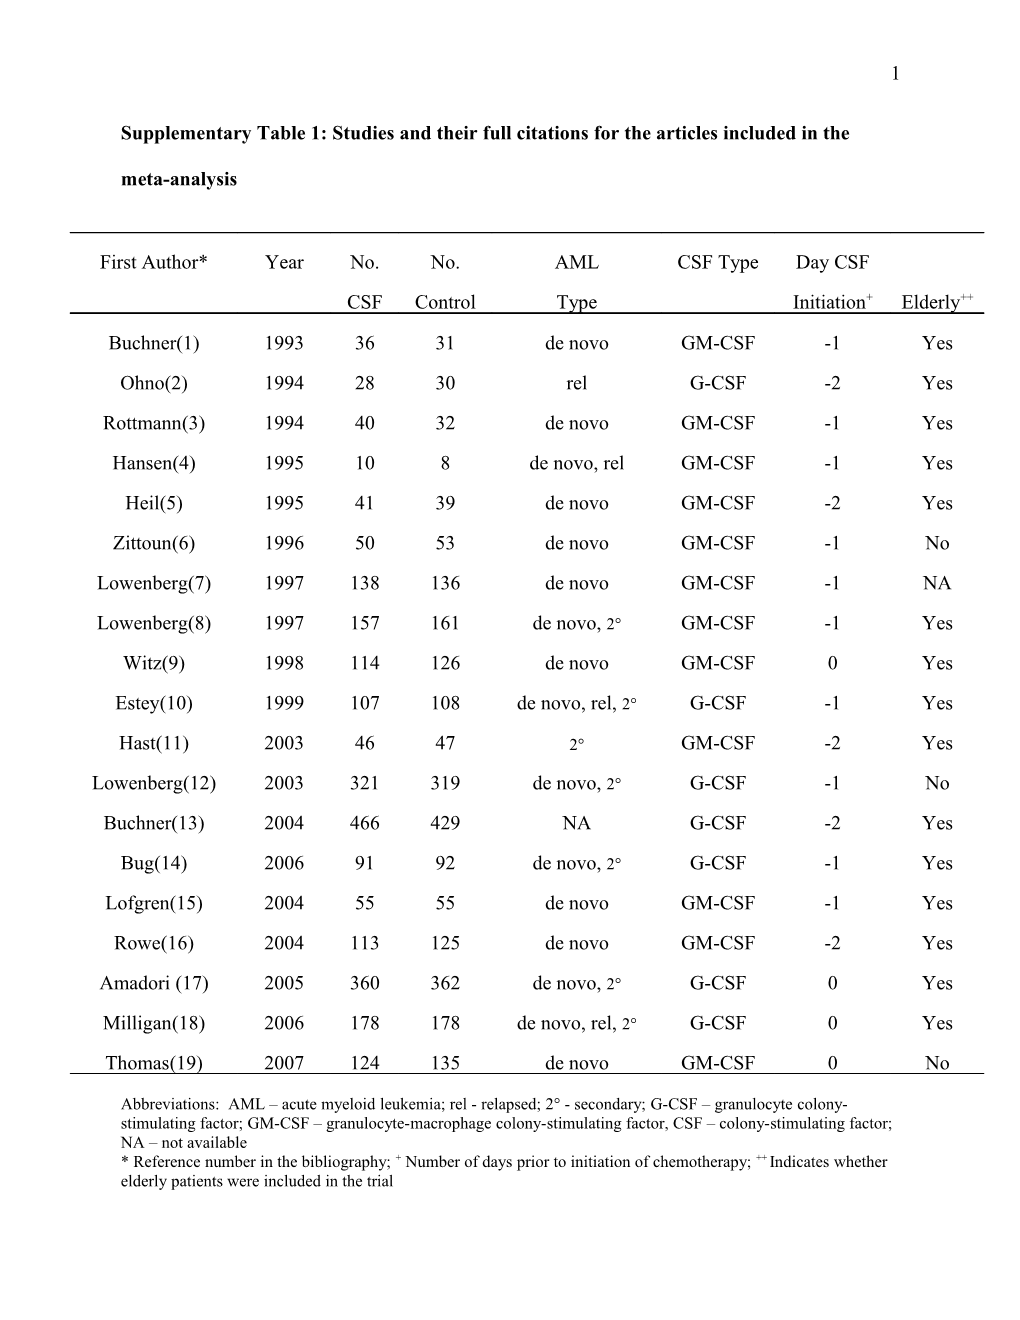 Efficacy of Gcsf and Gmcsf in Pediatric Oncology: a Meta-Analysis of Randomized Controlled